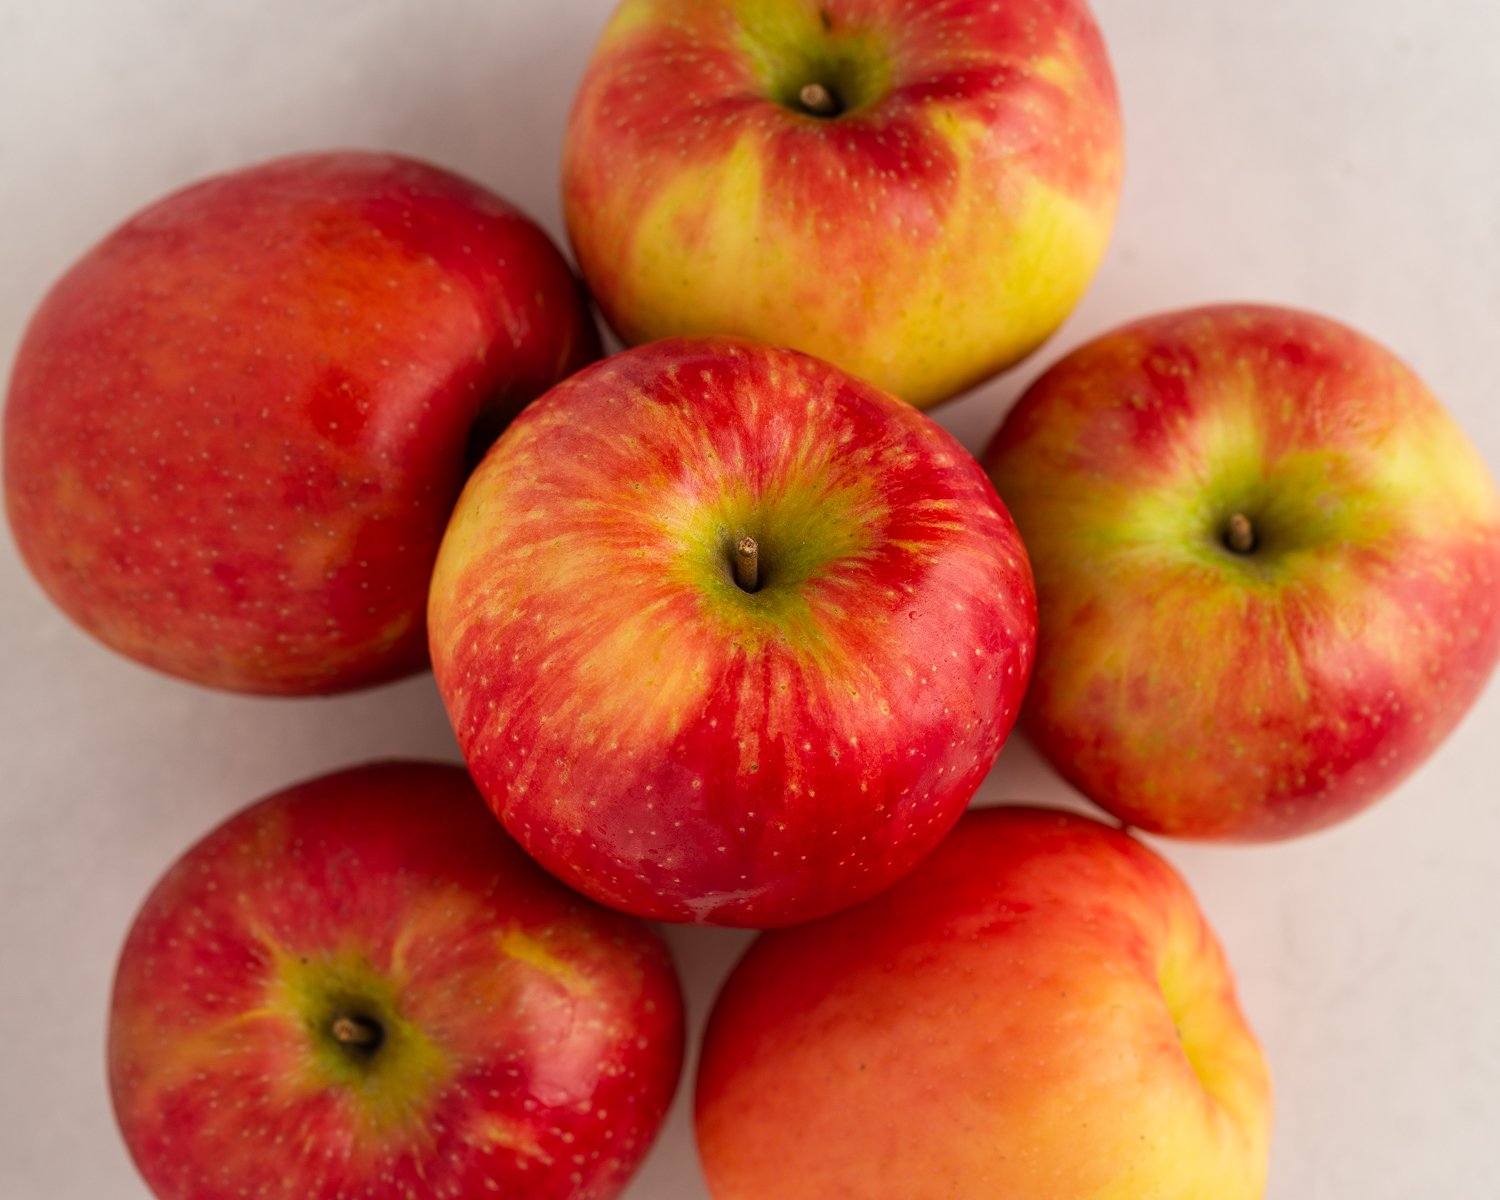 Mary's Ultimate Apple Guide: Picking, Storing, and Best Apples for Baking —  Mary DiSomma